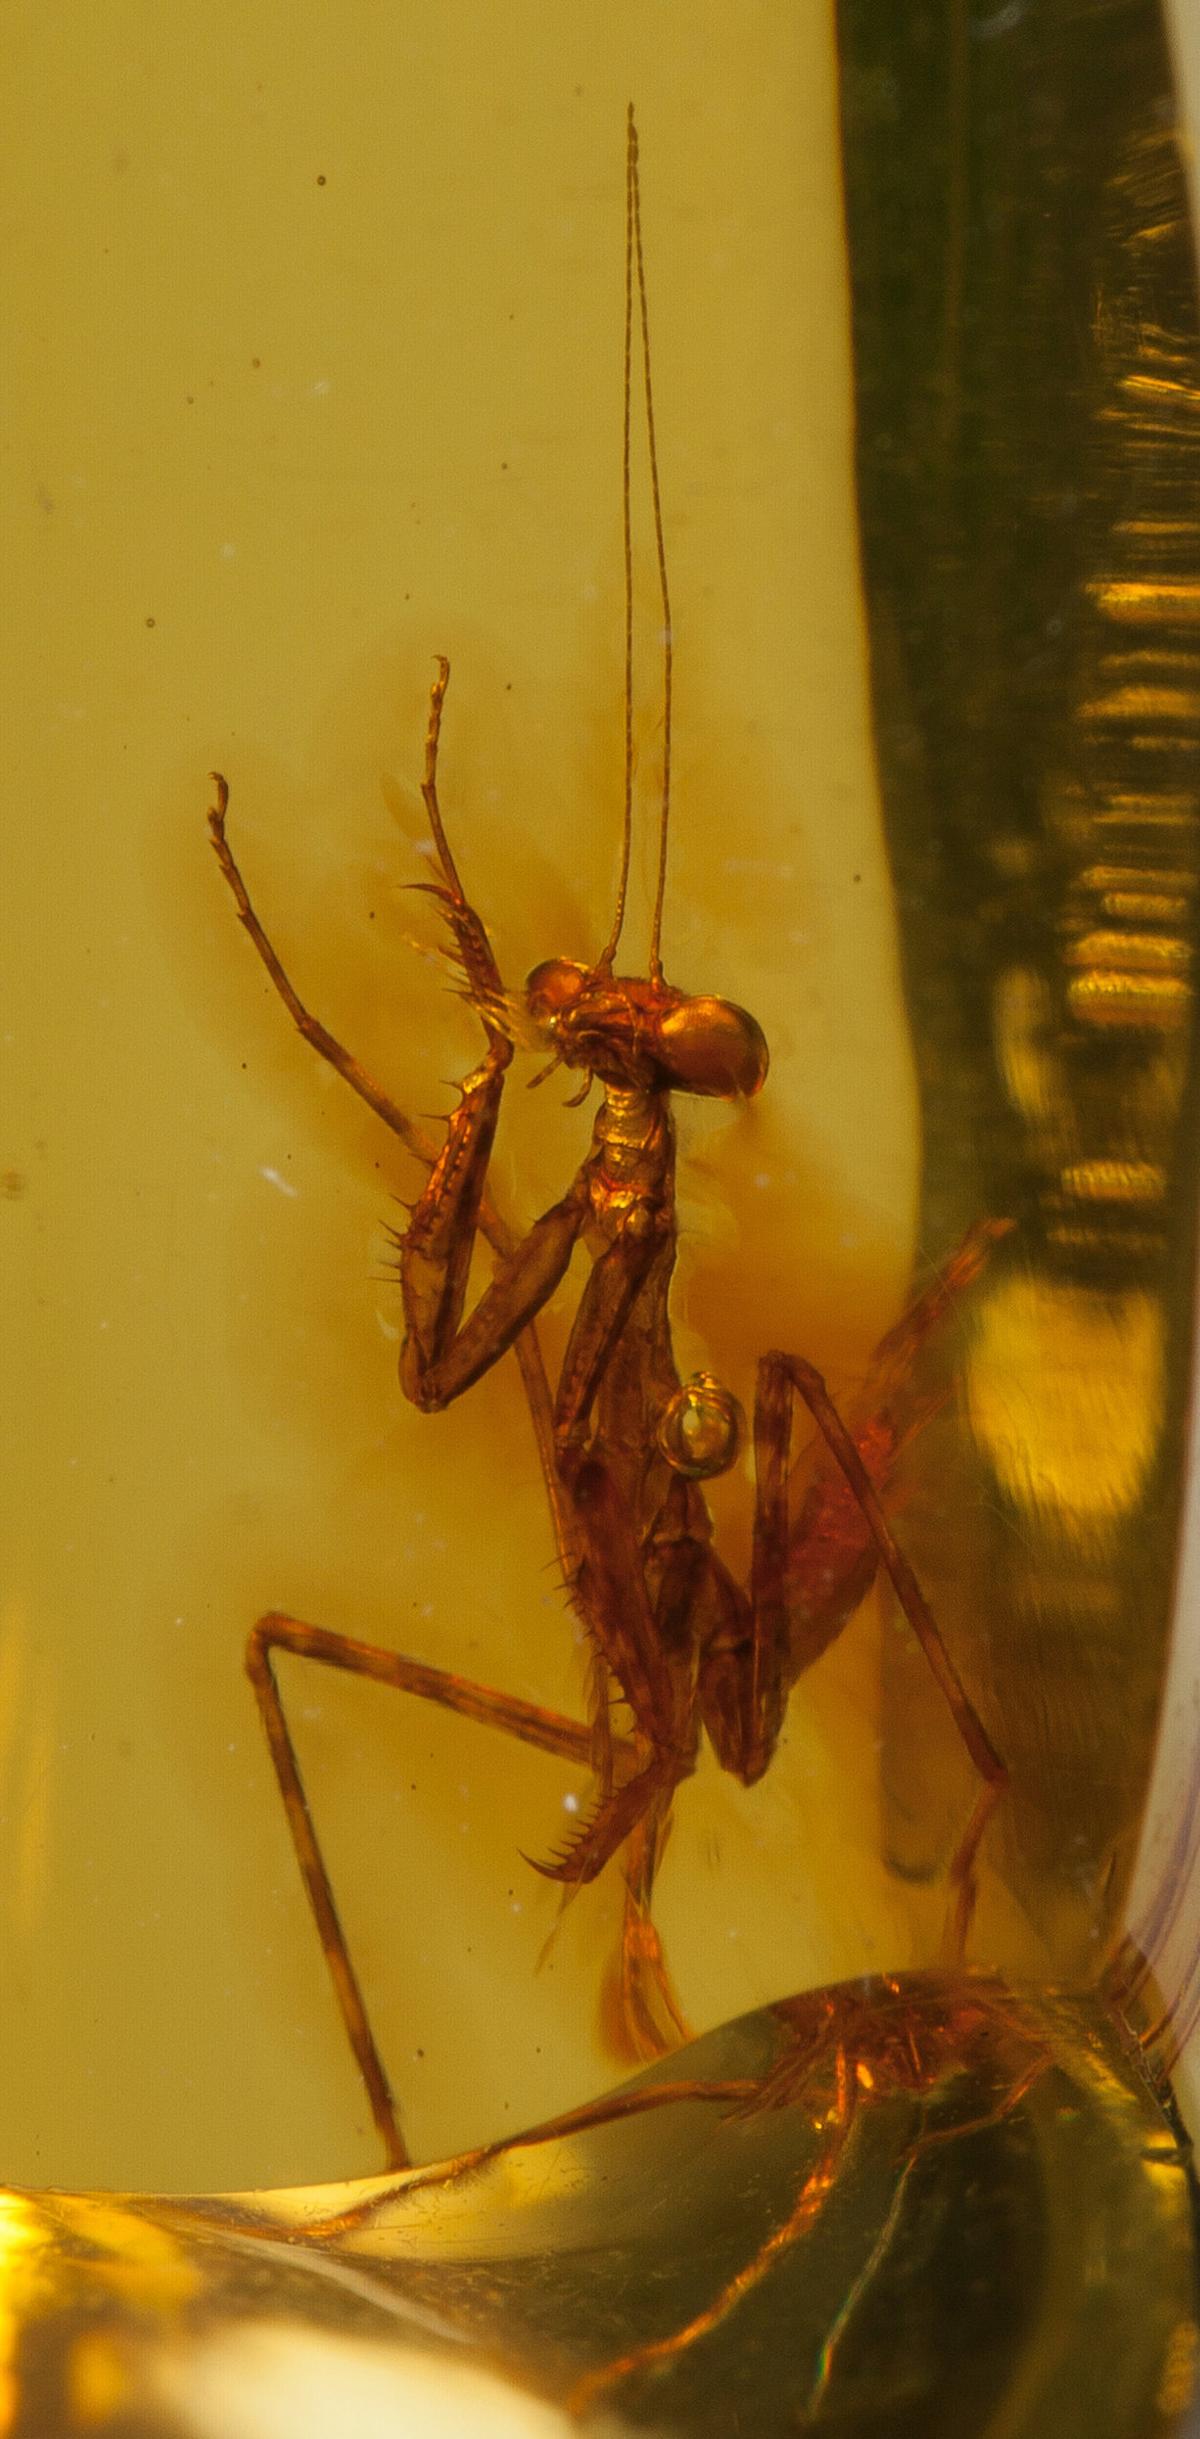 A detail showing the preserved limbs, body, and head of the praying mantis encased in fossilized amber. (Courtesy of Heritage Auctions, HA.com)